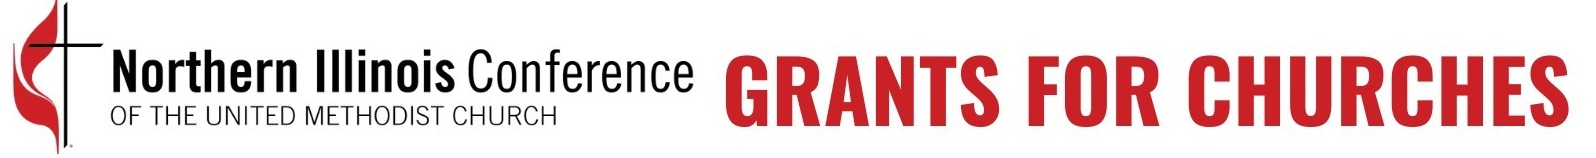 Nic Grants For Churches Banner